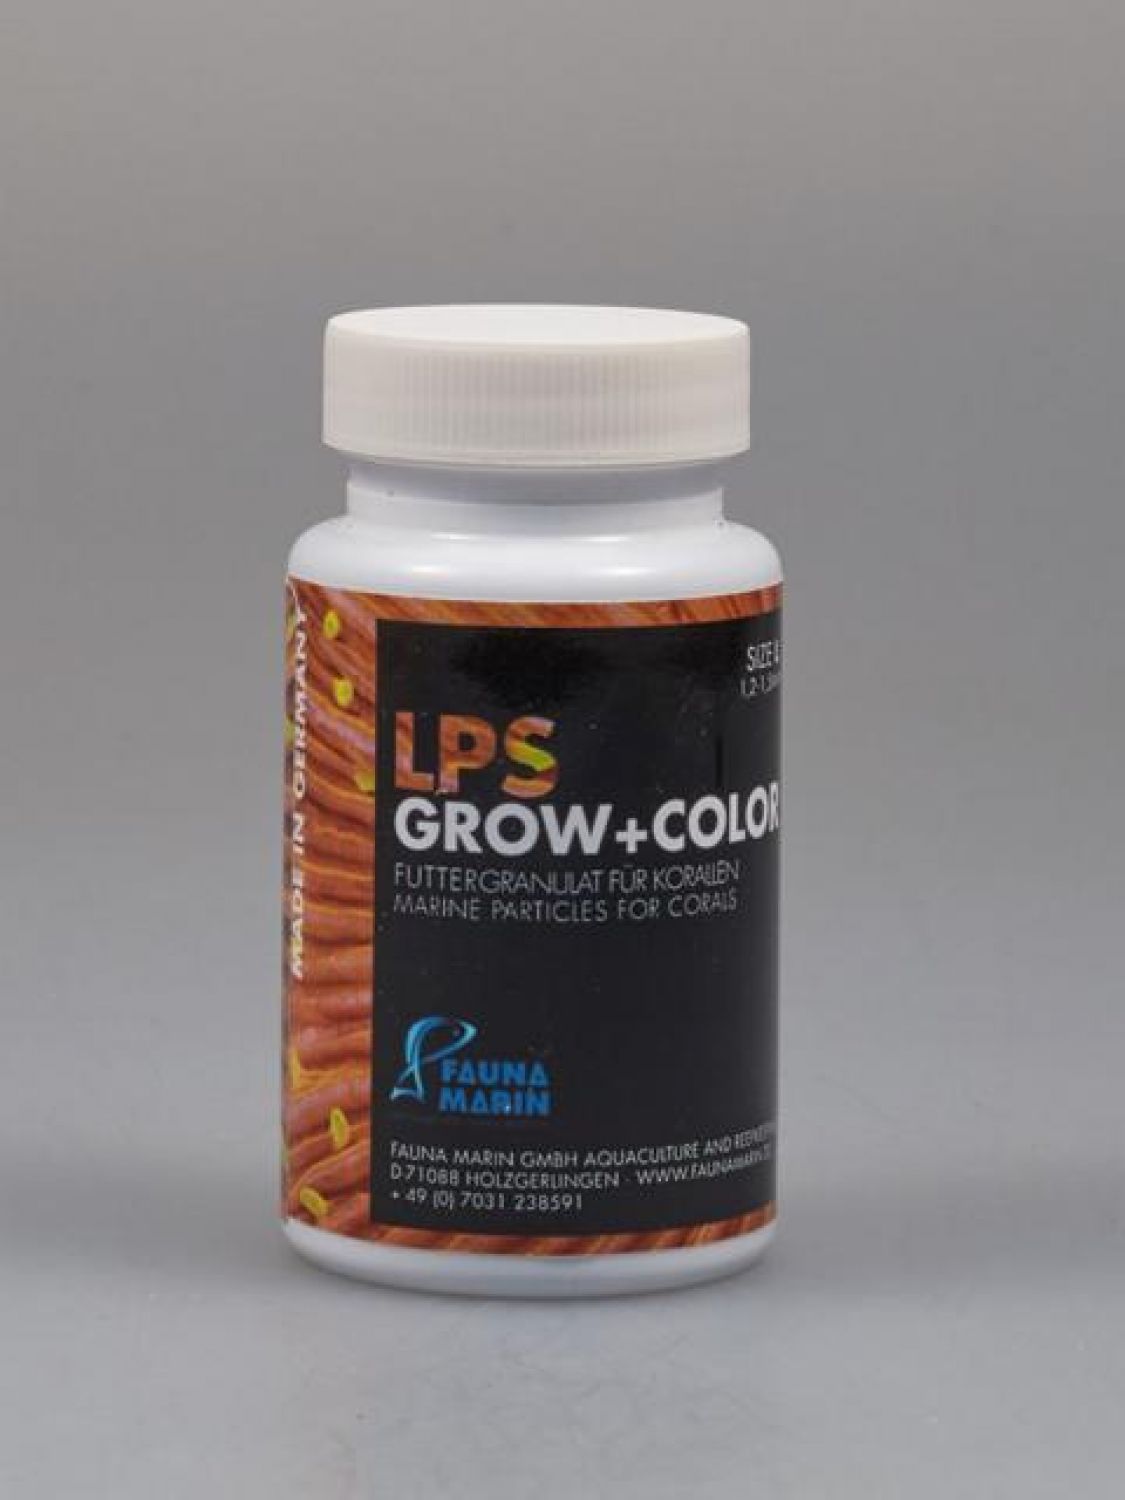 Fauna Marin - LPS Grow and Color M 100 ml / 60 gr